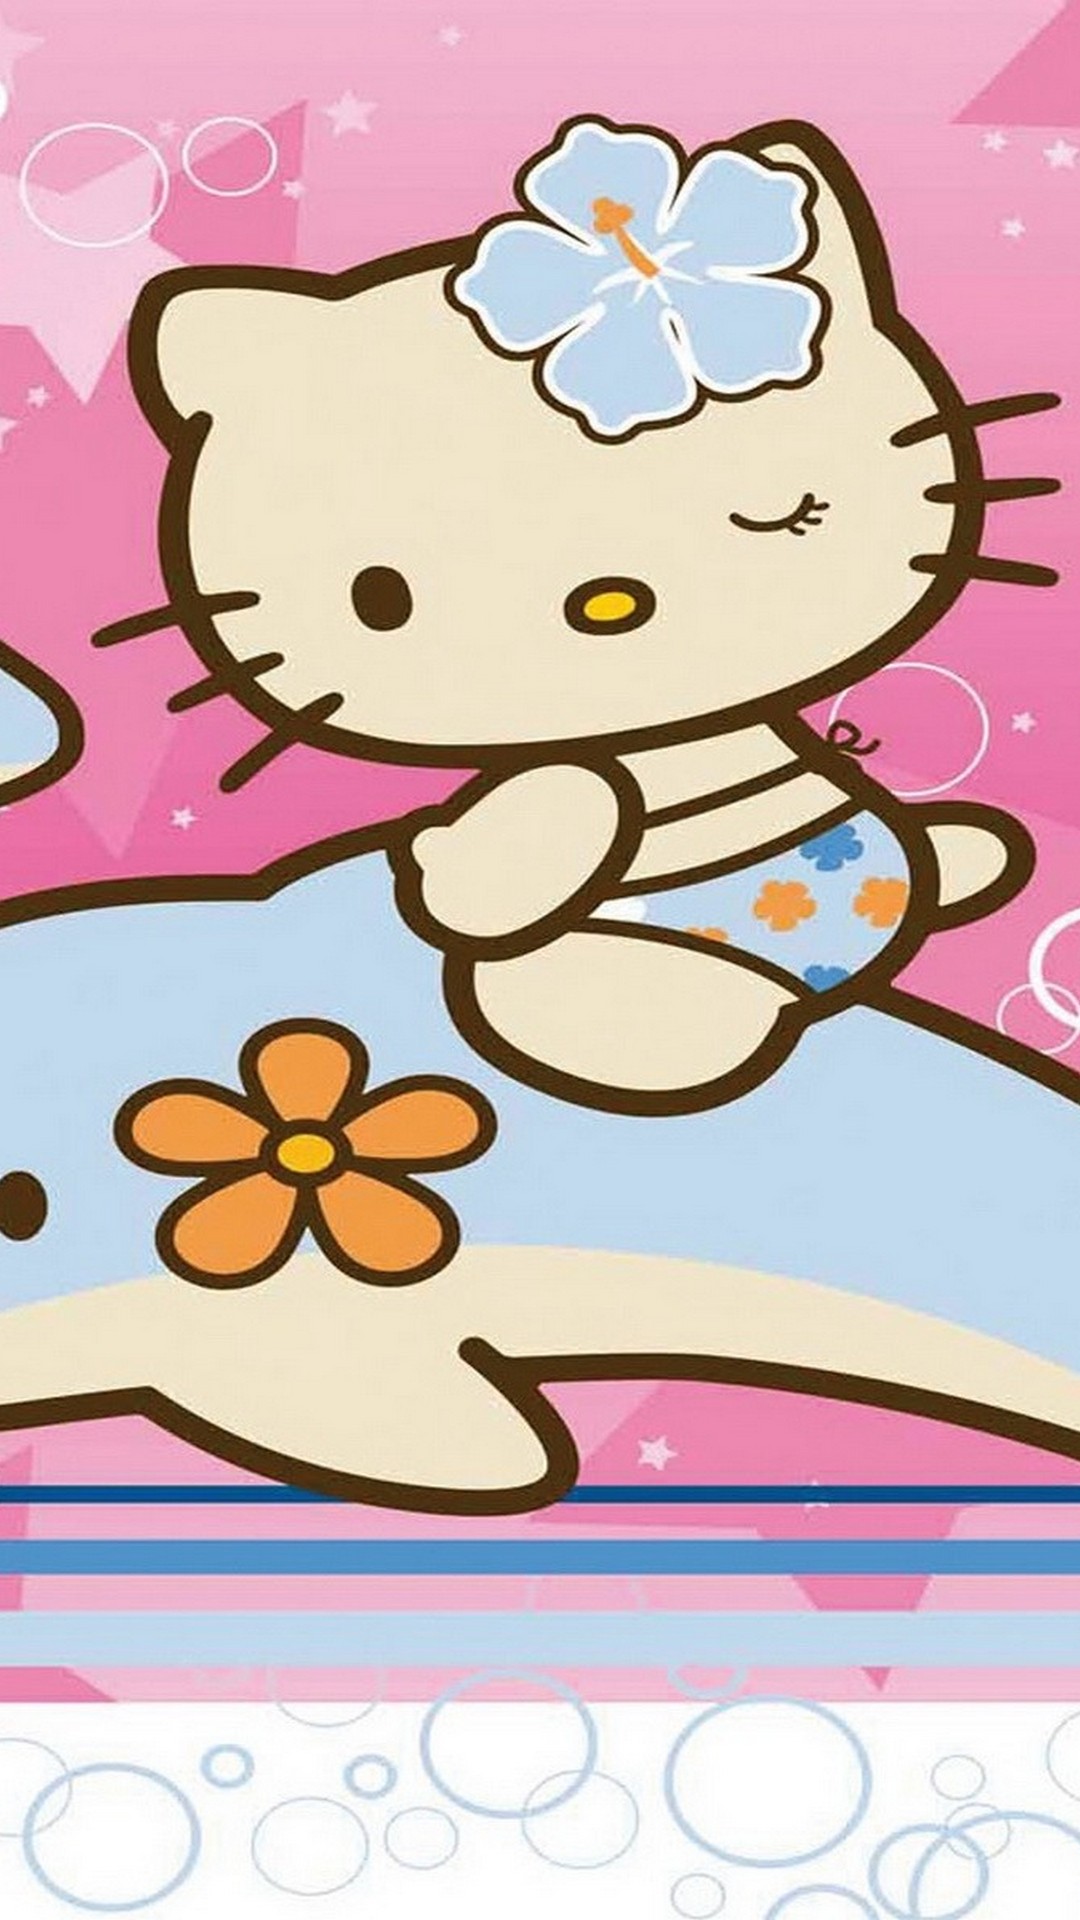 Kitty HD Wallpaper For iPhone with image resolution 1080x1920 pixel. You can use this wallpaper as background for your desktop Computer Screensavers, Android or iPhone smartphones